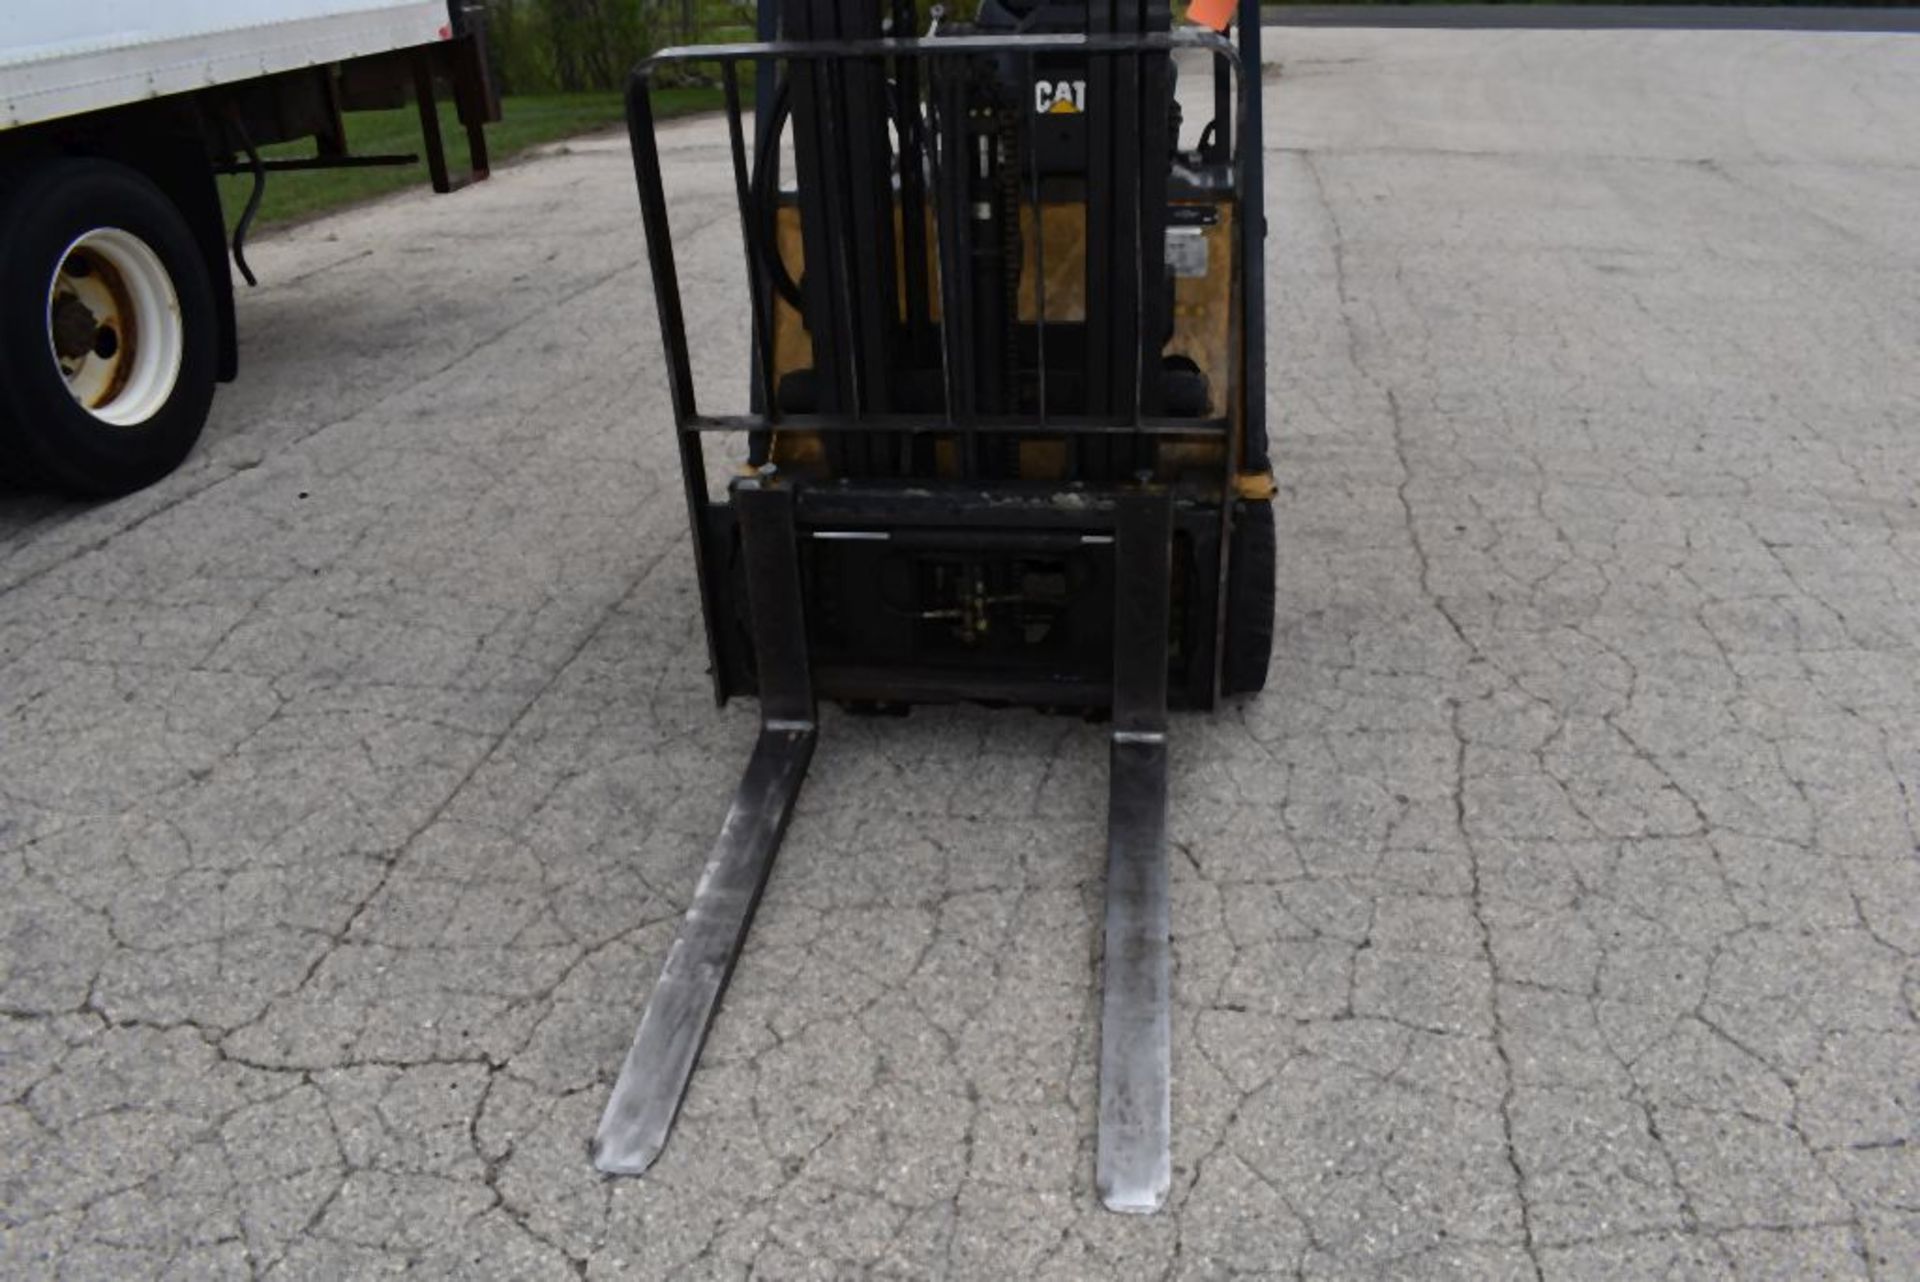 CATERPILLAR RIDE ON FORK TRUCK, MODEL ET3500-AC, S/N: ETB1400111, 36V ELECTRIC TYPE WITH CHARGER, - Image 5 of 8